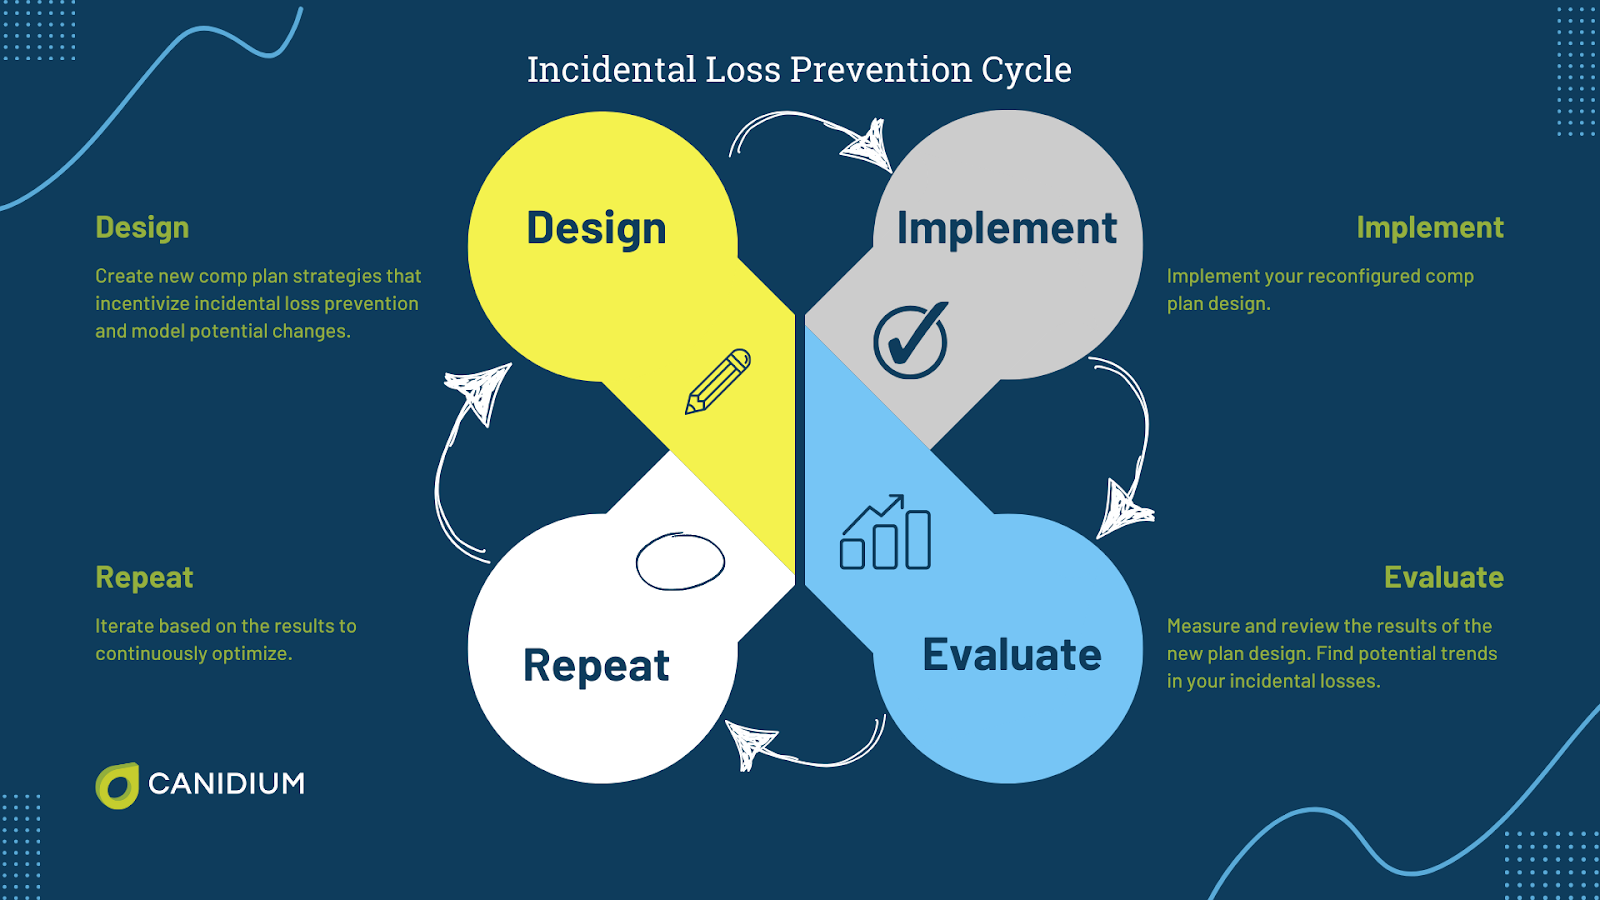 Incidental loss prevention cycle 